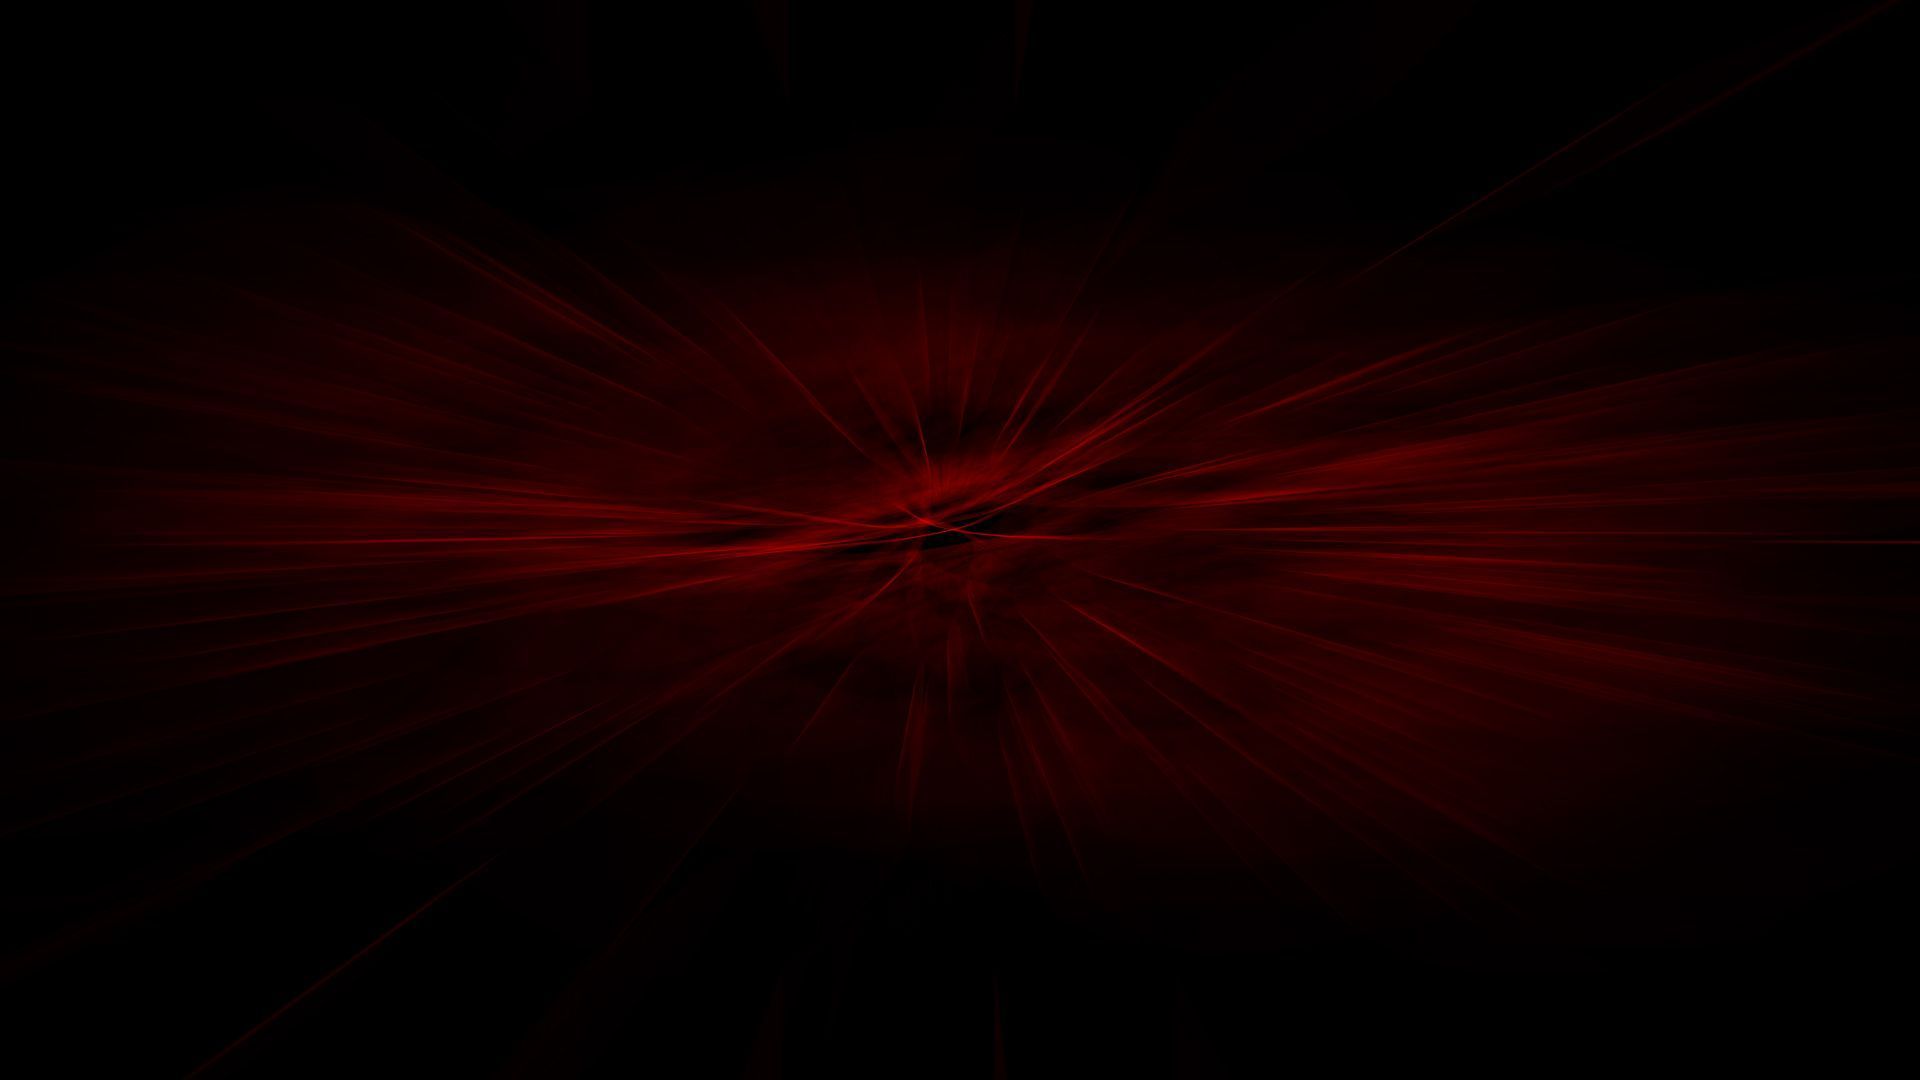 Black And Red Abstract Wallpaper 11 1920x1080